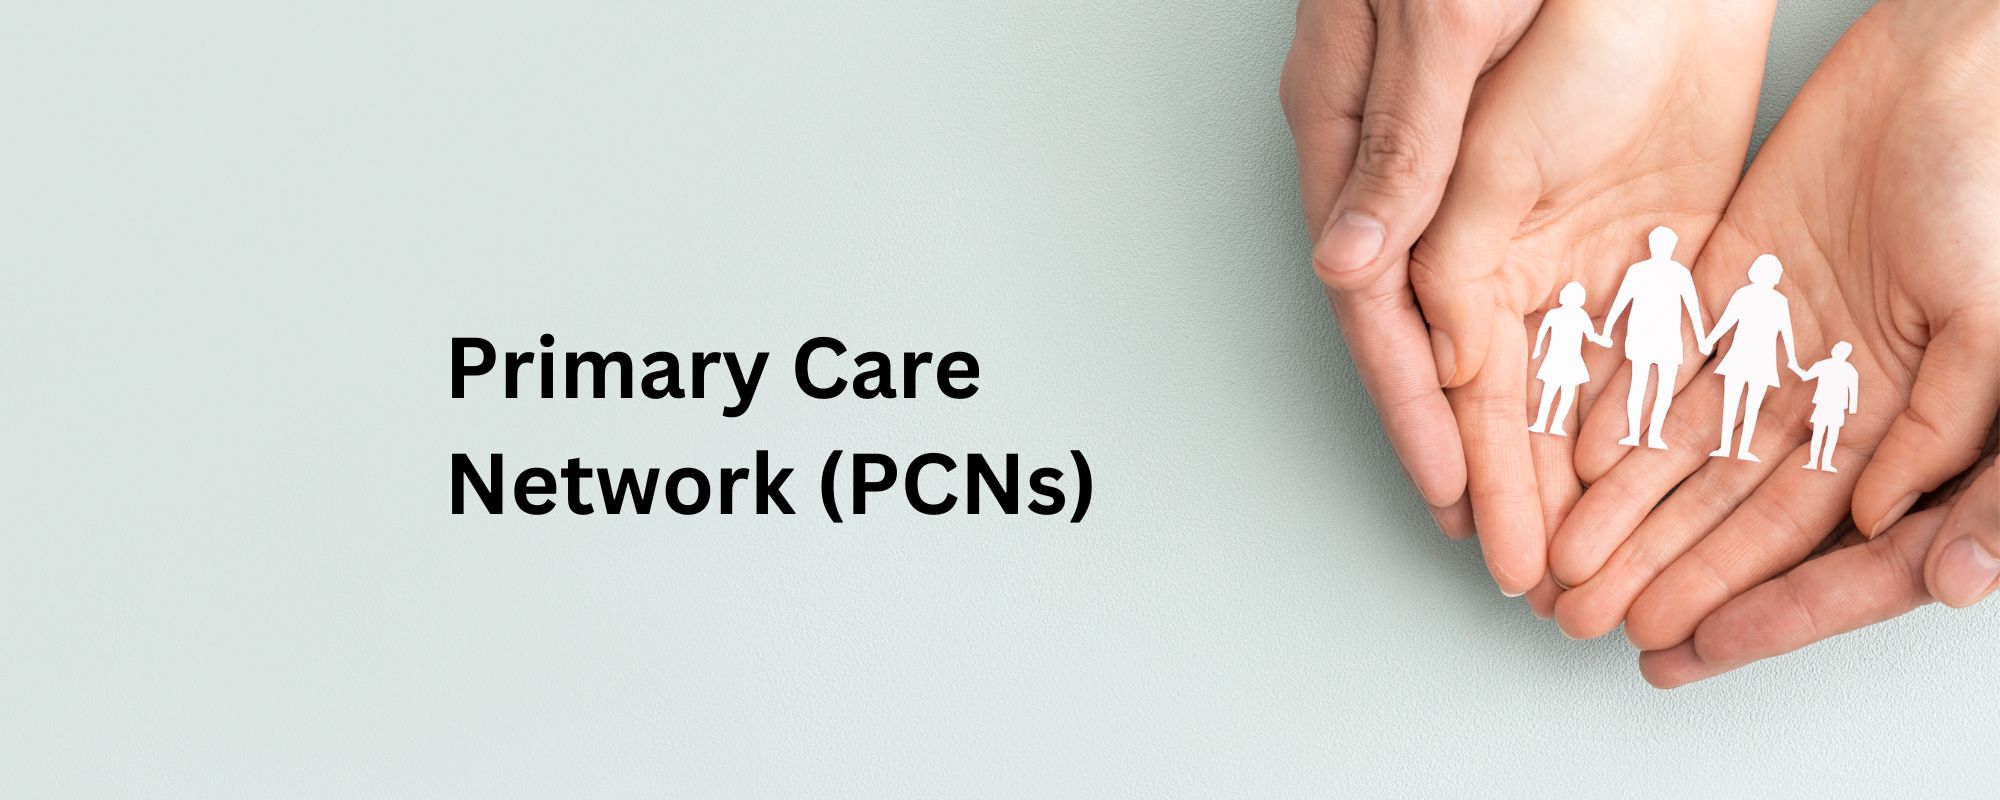 Enhancing Safety & Wellbeing for Primary Care Networks (PCNs) 